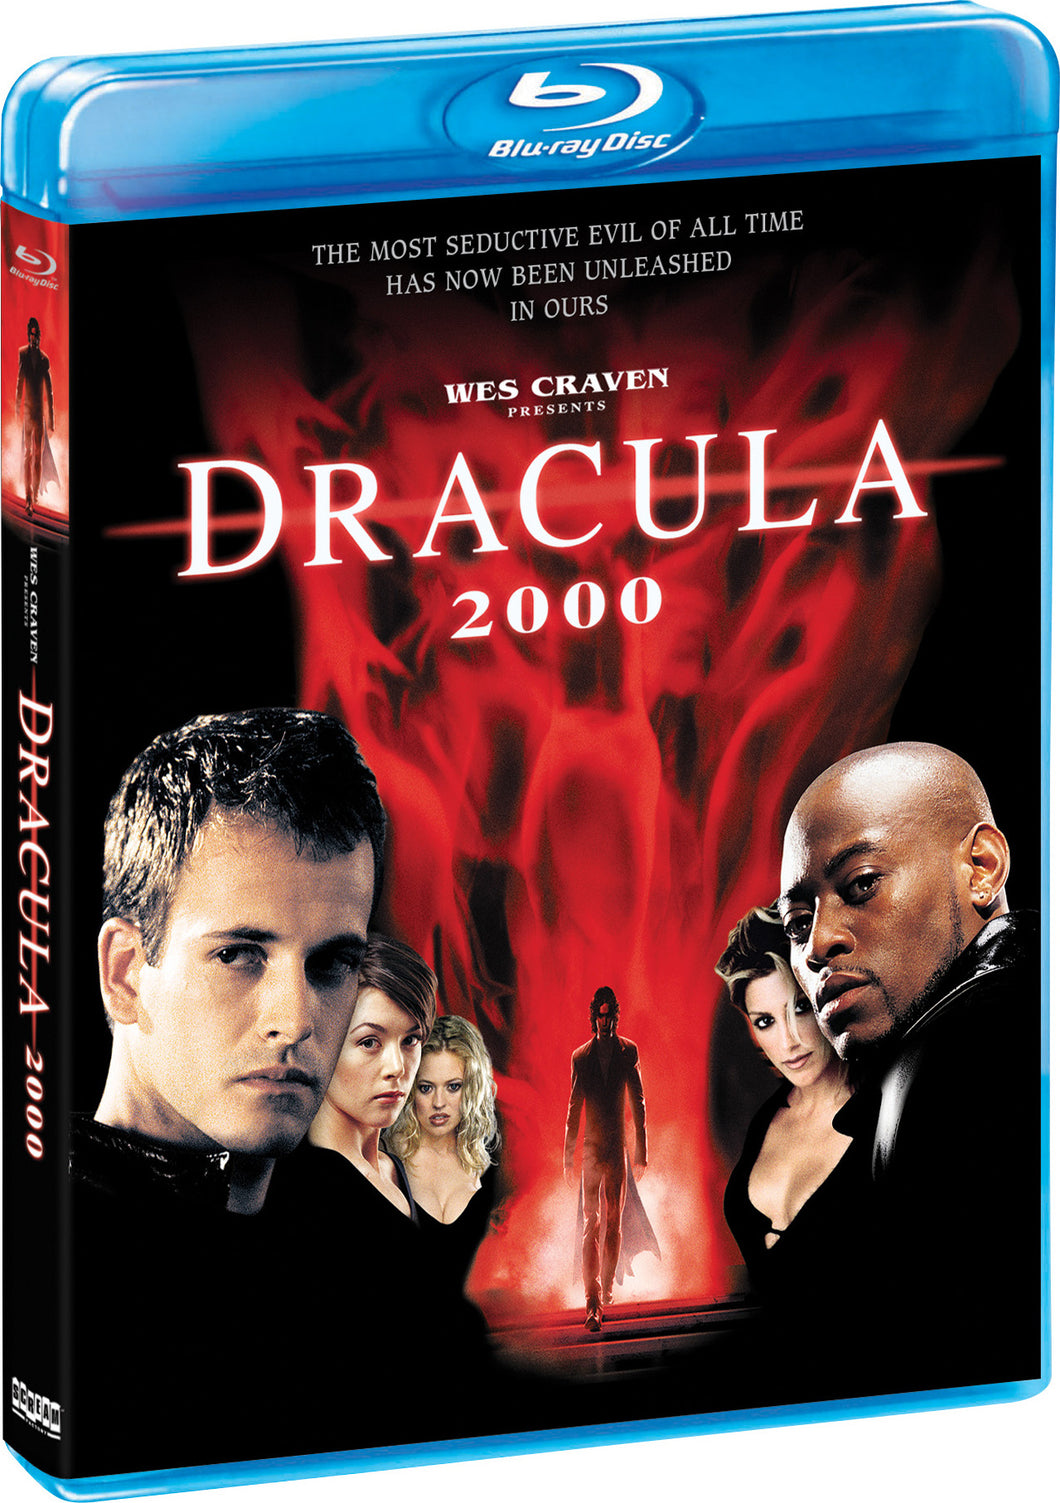 Dracula 2000 - front cover